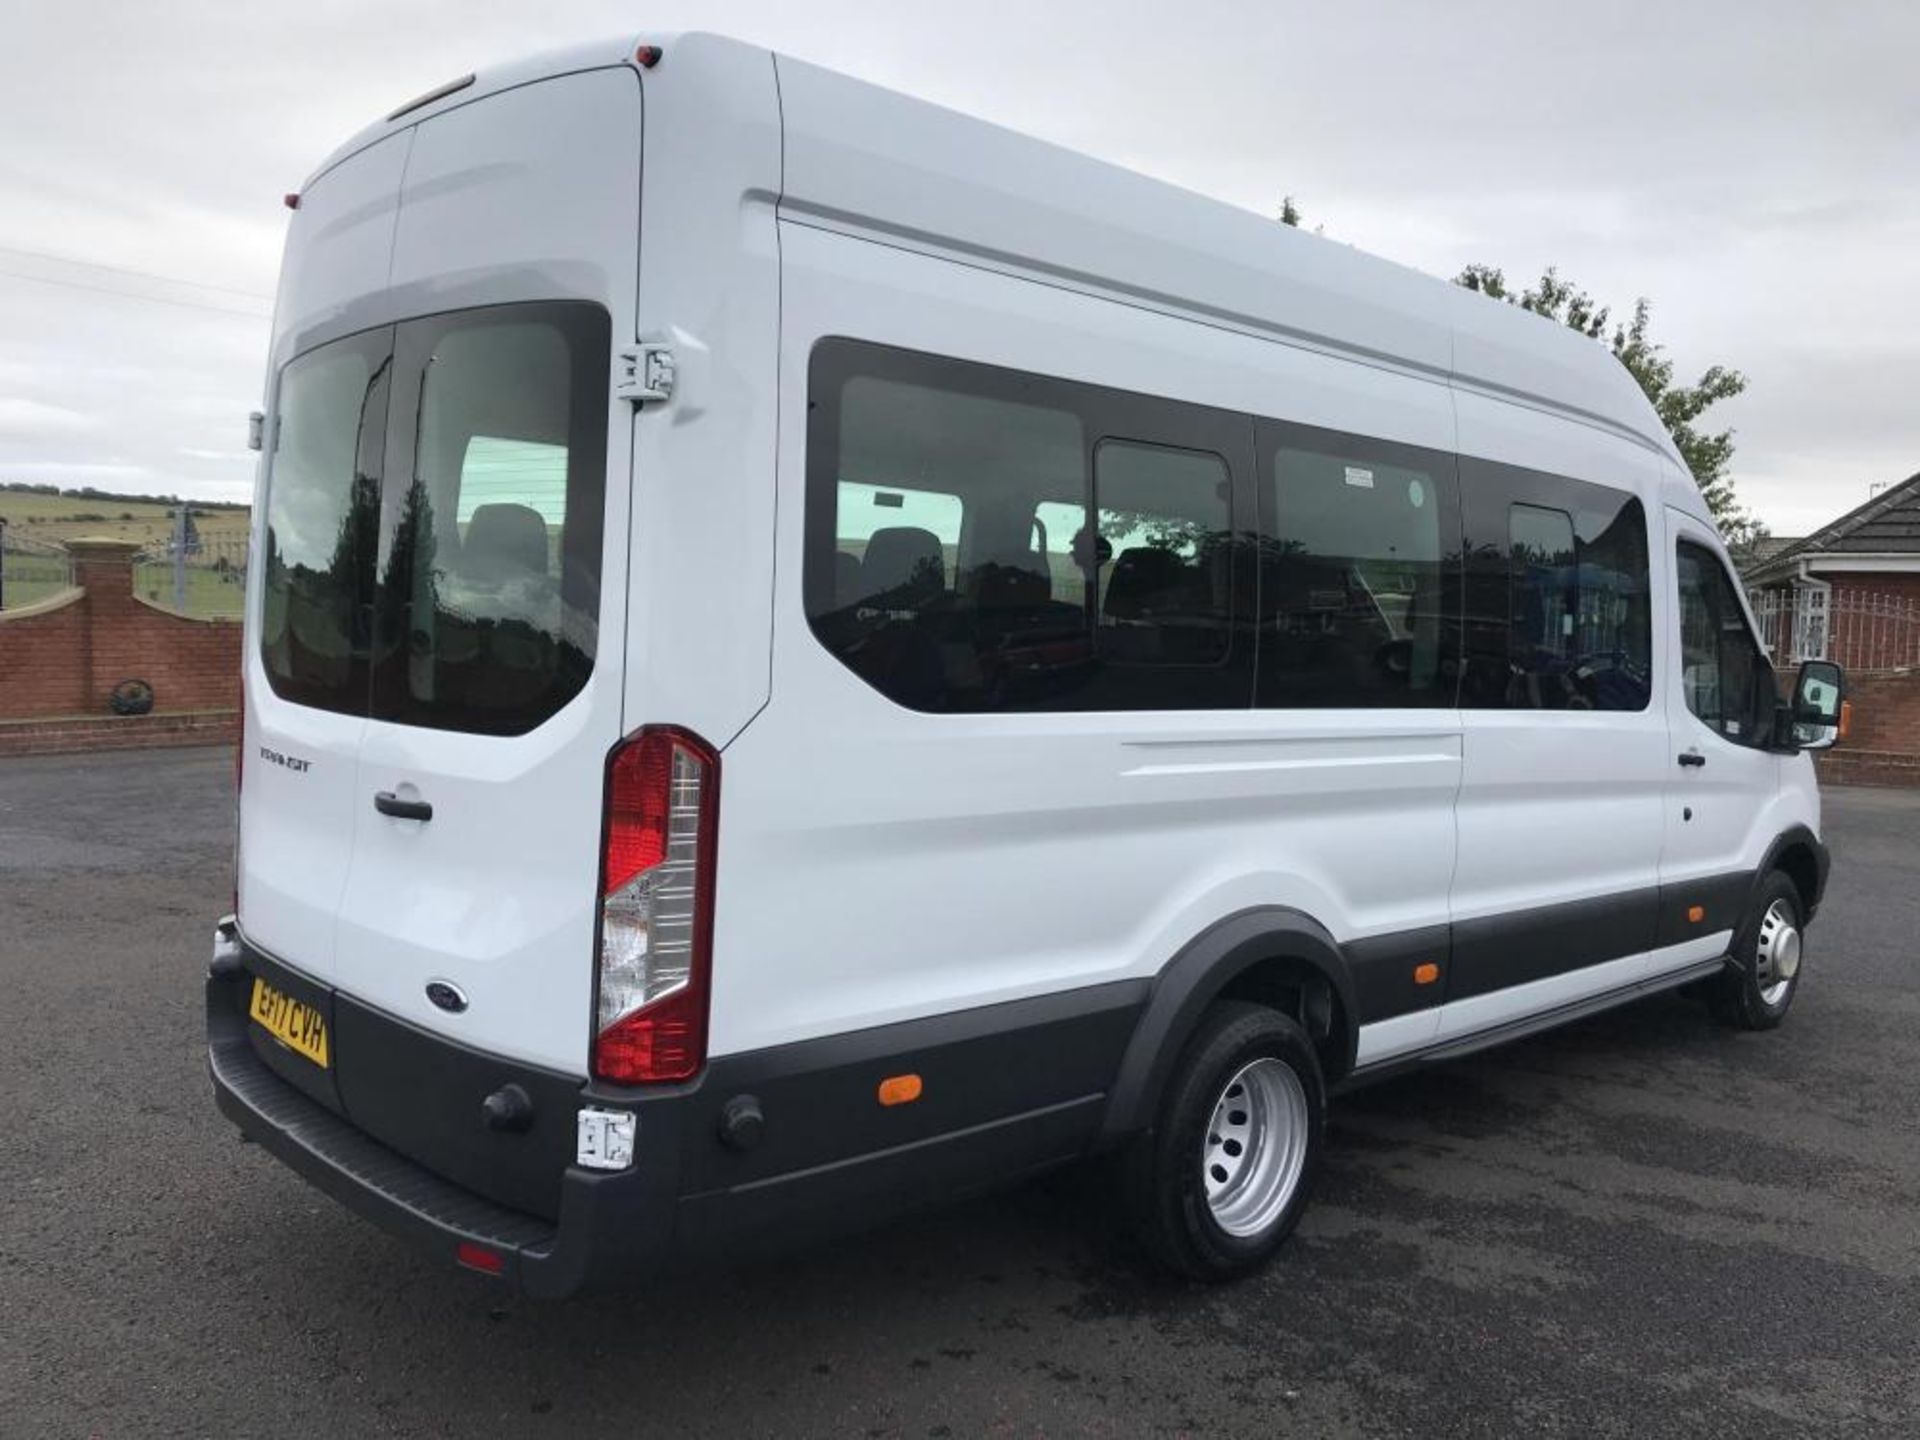 2017/17 REG FORD TRANSIT 460 ECONETIC TECH 2.2 DIESEL WHITE 17 SEAT MINIBUS, SHOWING 0 FORMER KEEPER - Image 4 of 17